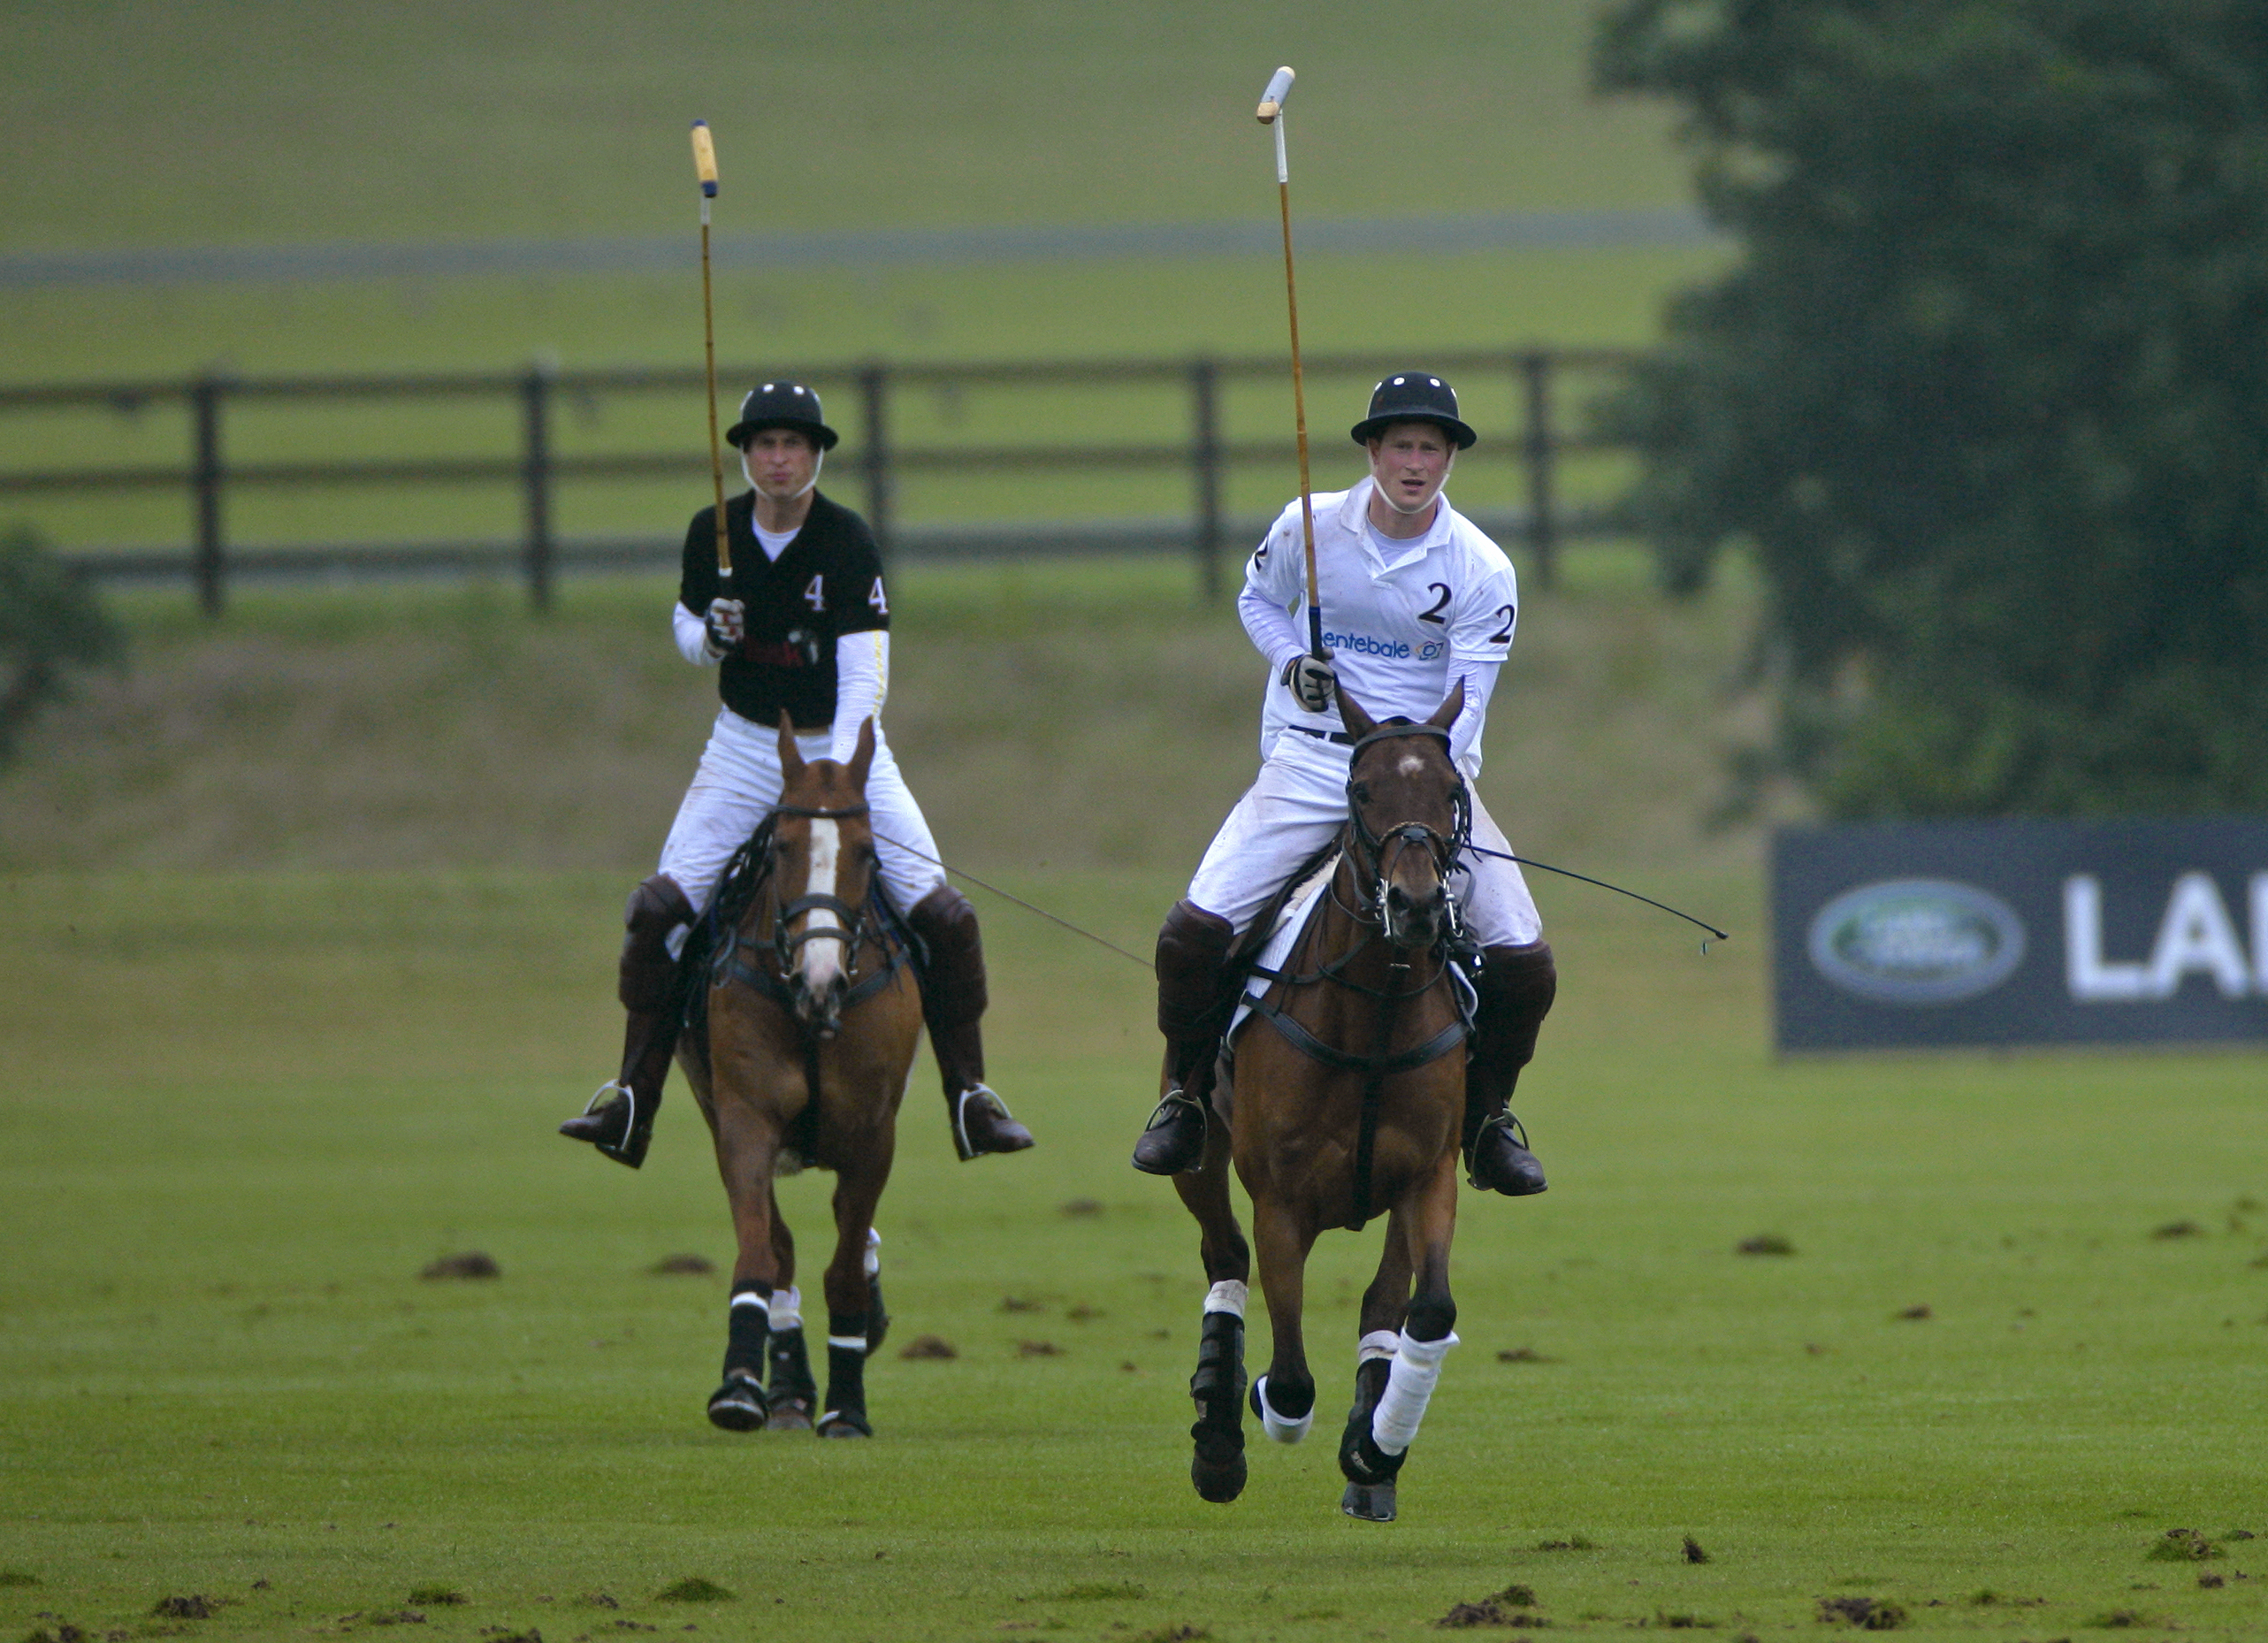 Prince William, Duke of Cambridge and Prince Harry play against each other in the Sentebale Polo Cup polo match at Coworth Park Polo Club on June 12, 2011 in Ascot, United Kingdom. (Max Mumby/Indigo—Getty Images)